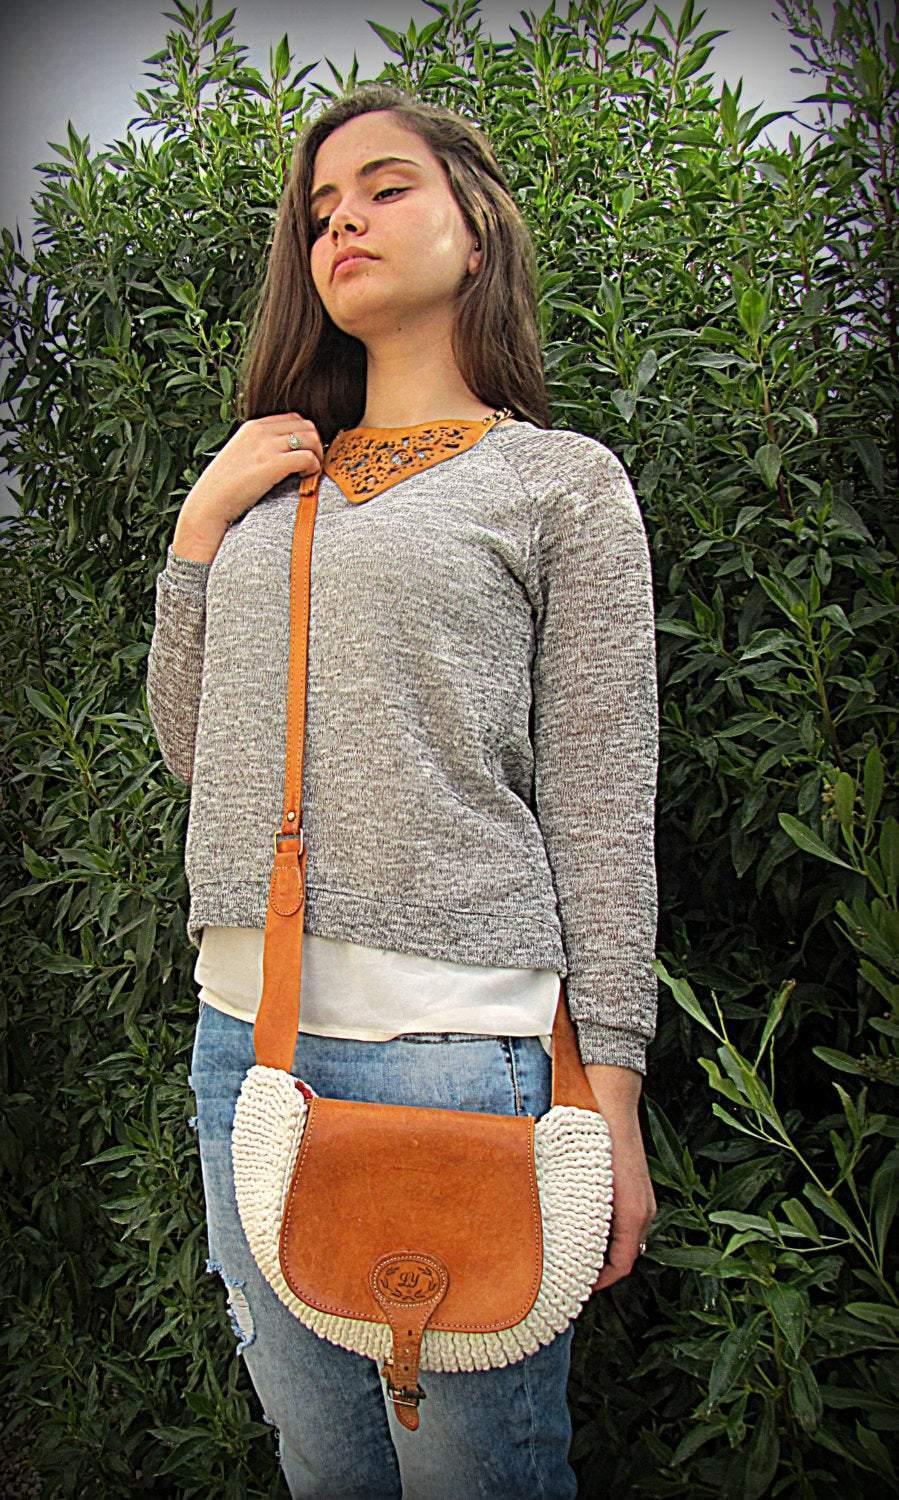 Crossbody / Shoulder bag made out of thick leather with a knitted fragment on a long leather strap - GLEZANT designer goods store. 